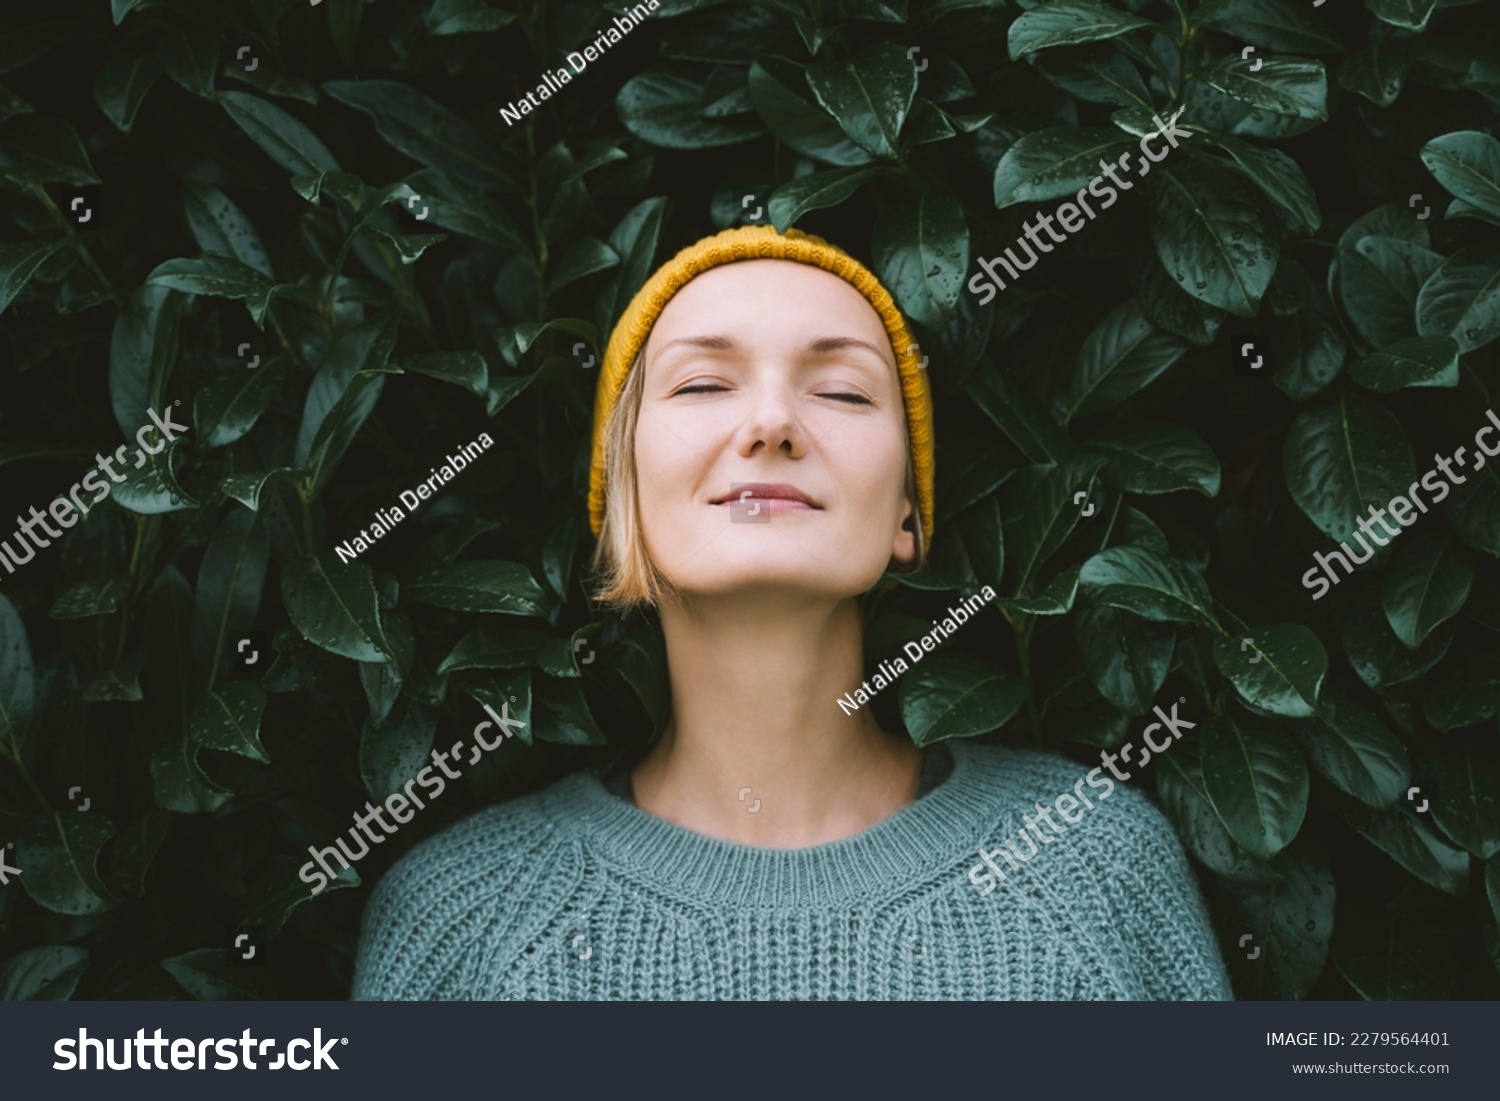 Portrait of relaxed and confident woman with eyes closed on background of green leaves wall. Thoughtful person in front of green hedge. Joy, zen and balance people. Stability through mental health #2279564401